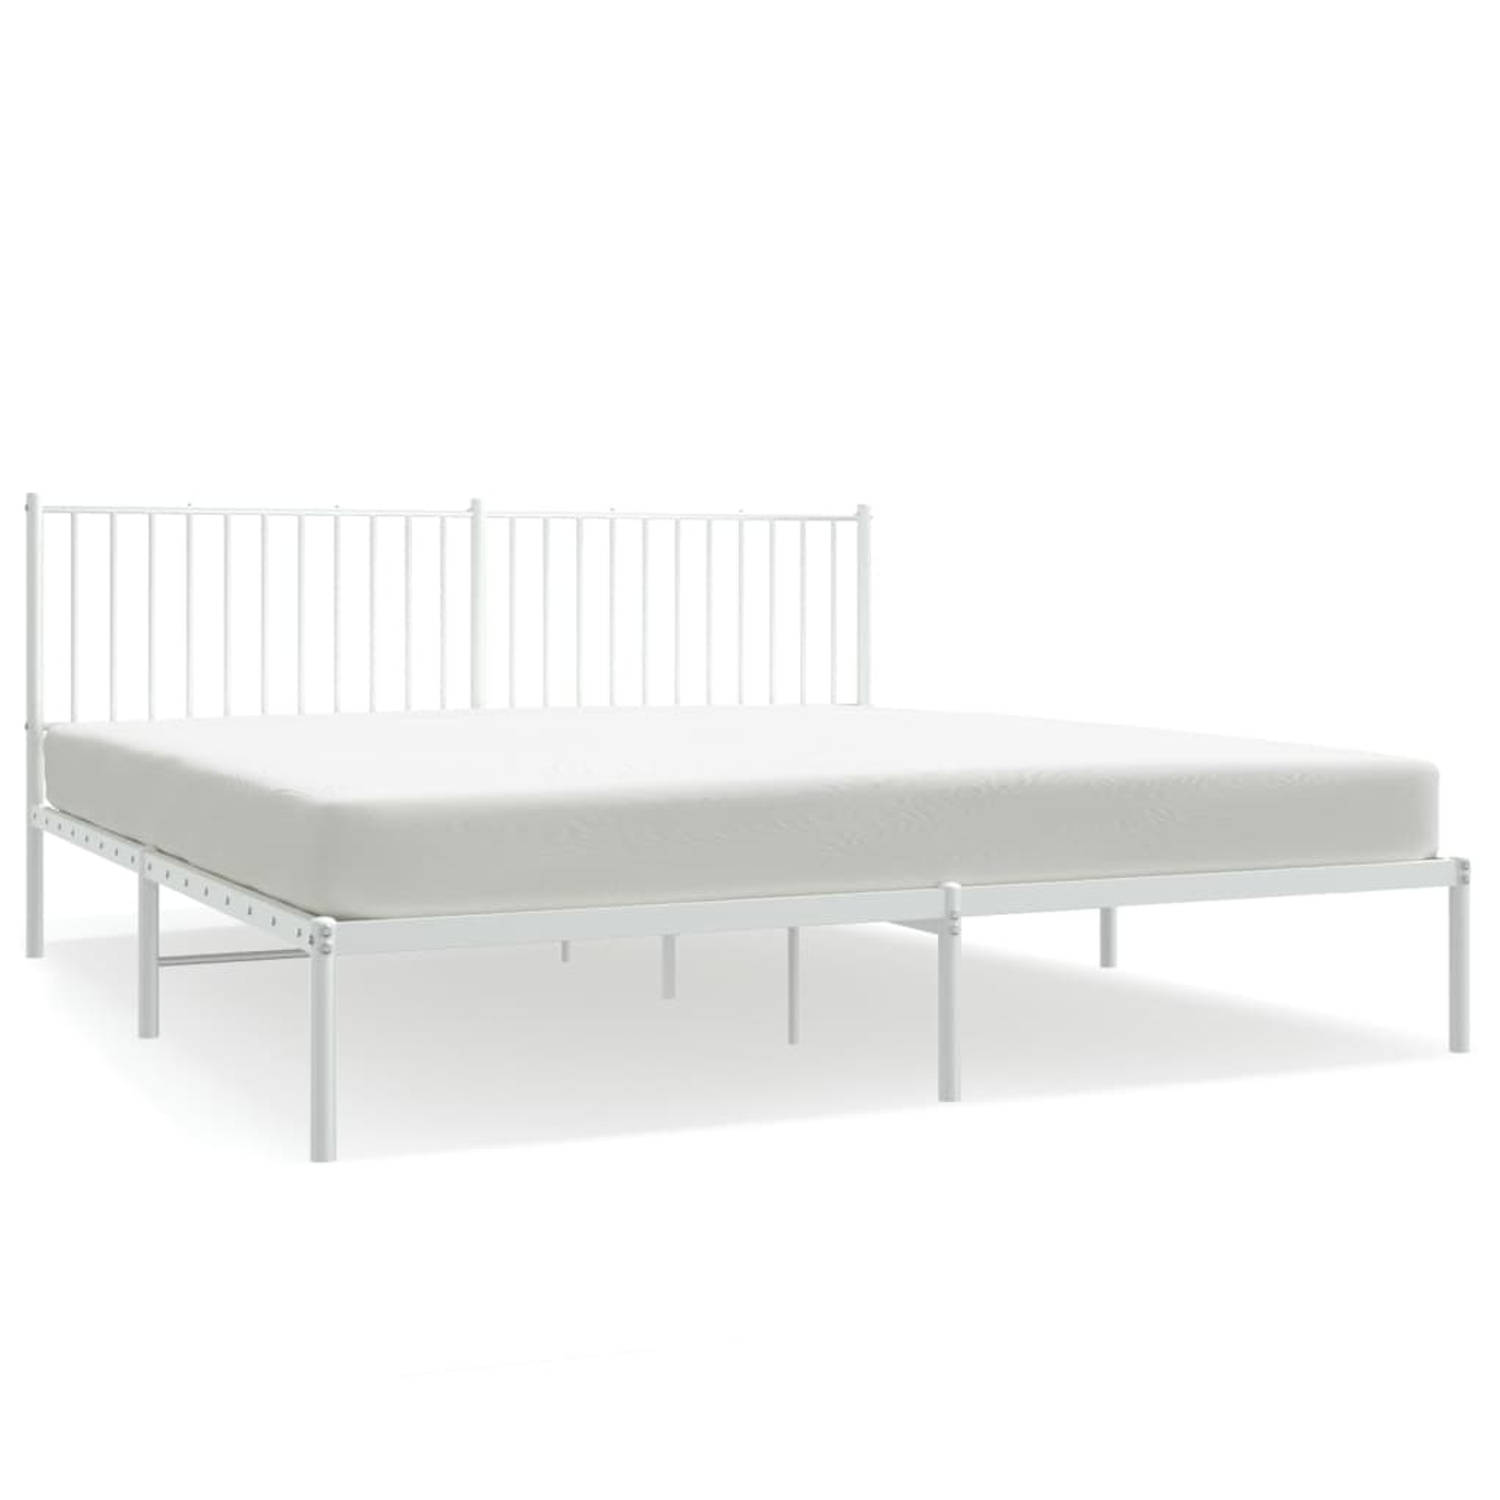 The Living Store Bedframe White Metal - 219 x 187 x 90.5 cm - Robust Construction